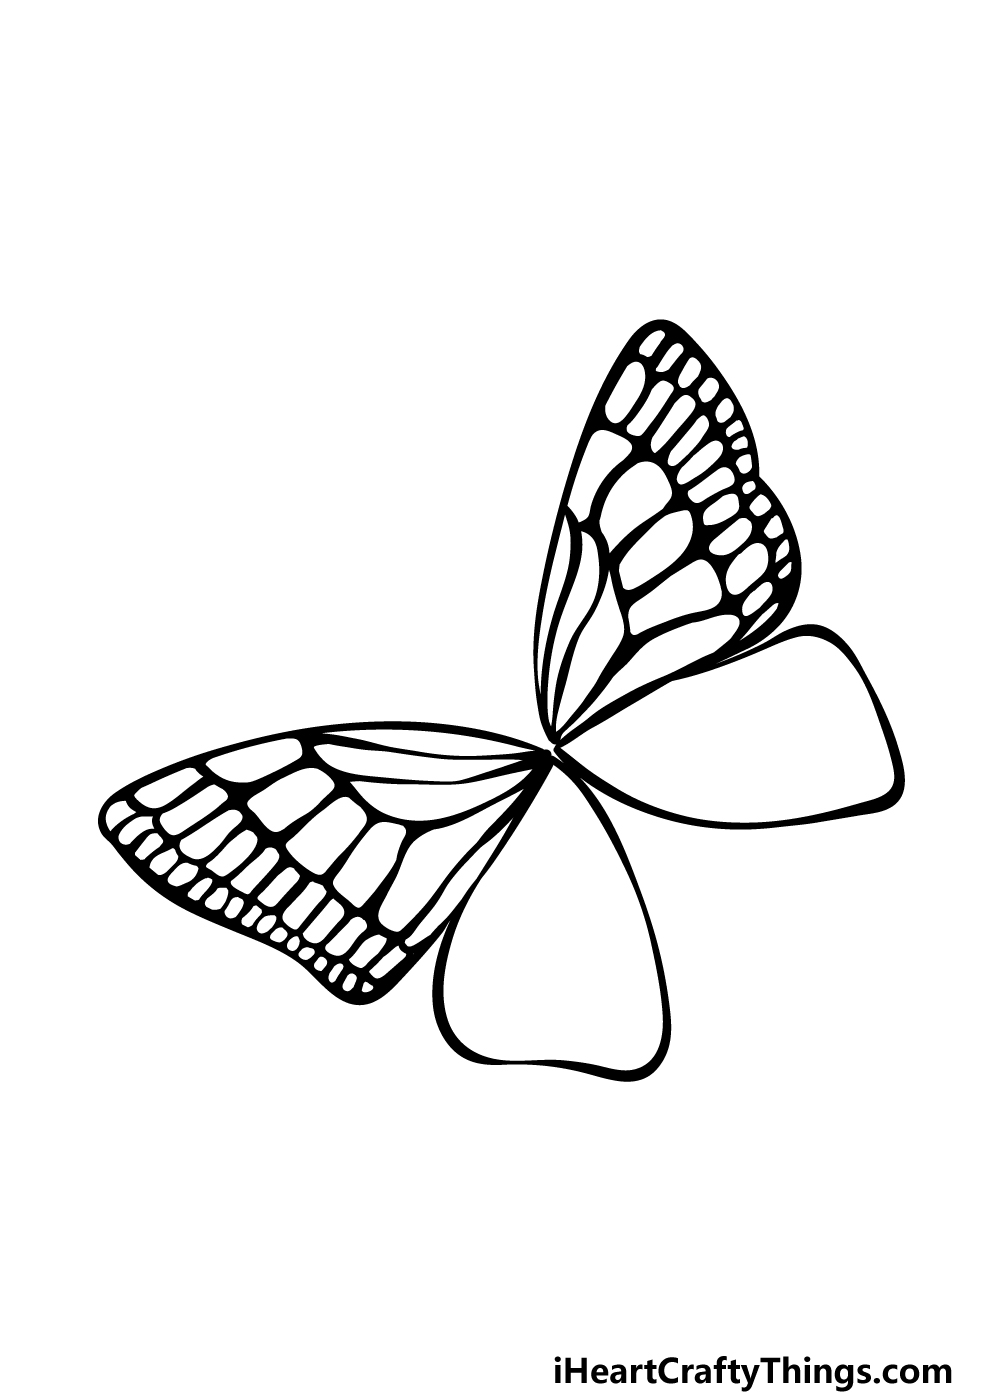 Colorful Butterfly Drawing - How To Draw A Colorful Butterfly Step ...